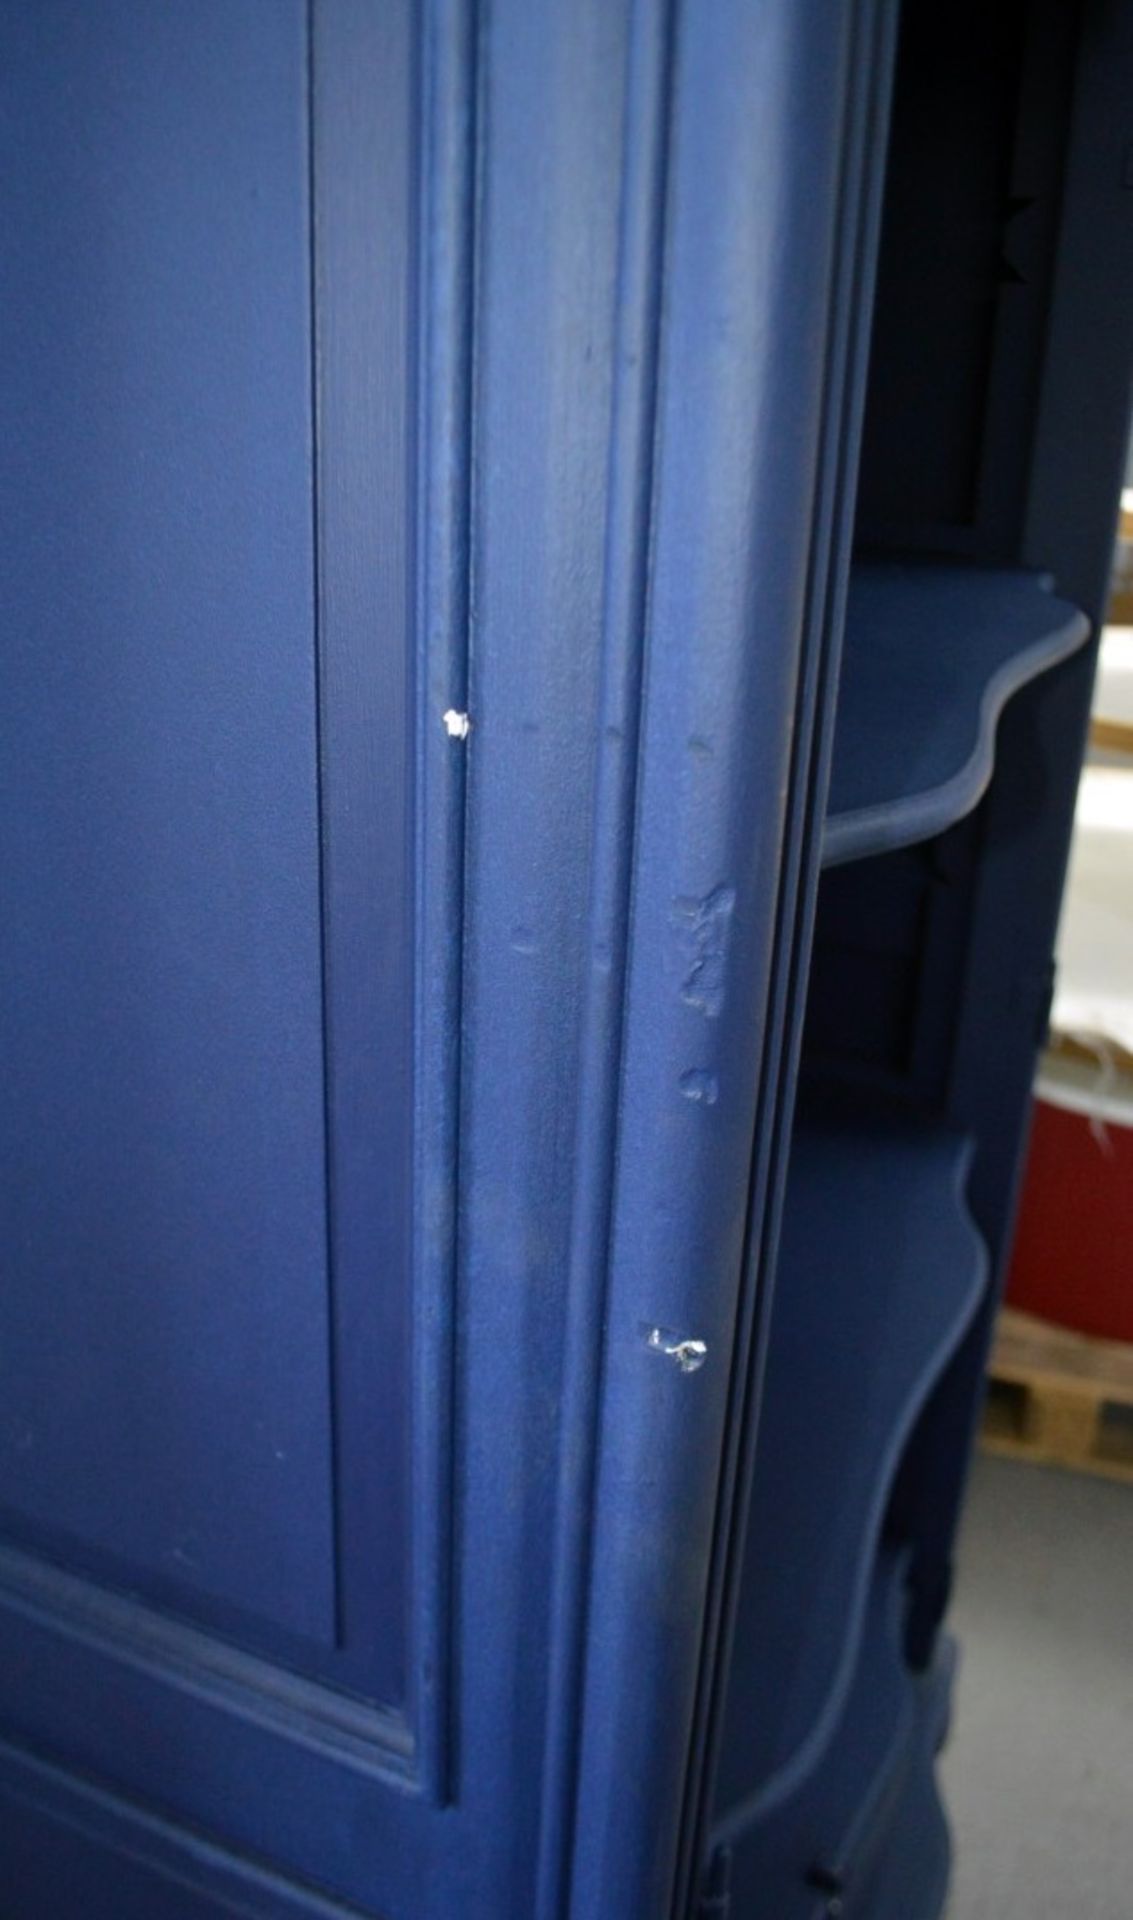 1 x Armoire 2.2-Metres Tall Display Cupboard With Bespoke Deep Blue Paintwork - Image 6 of 6